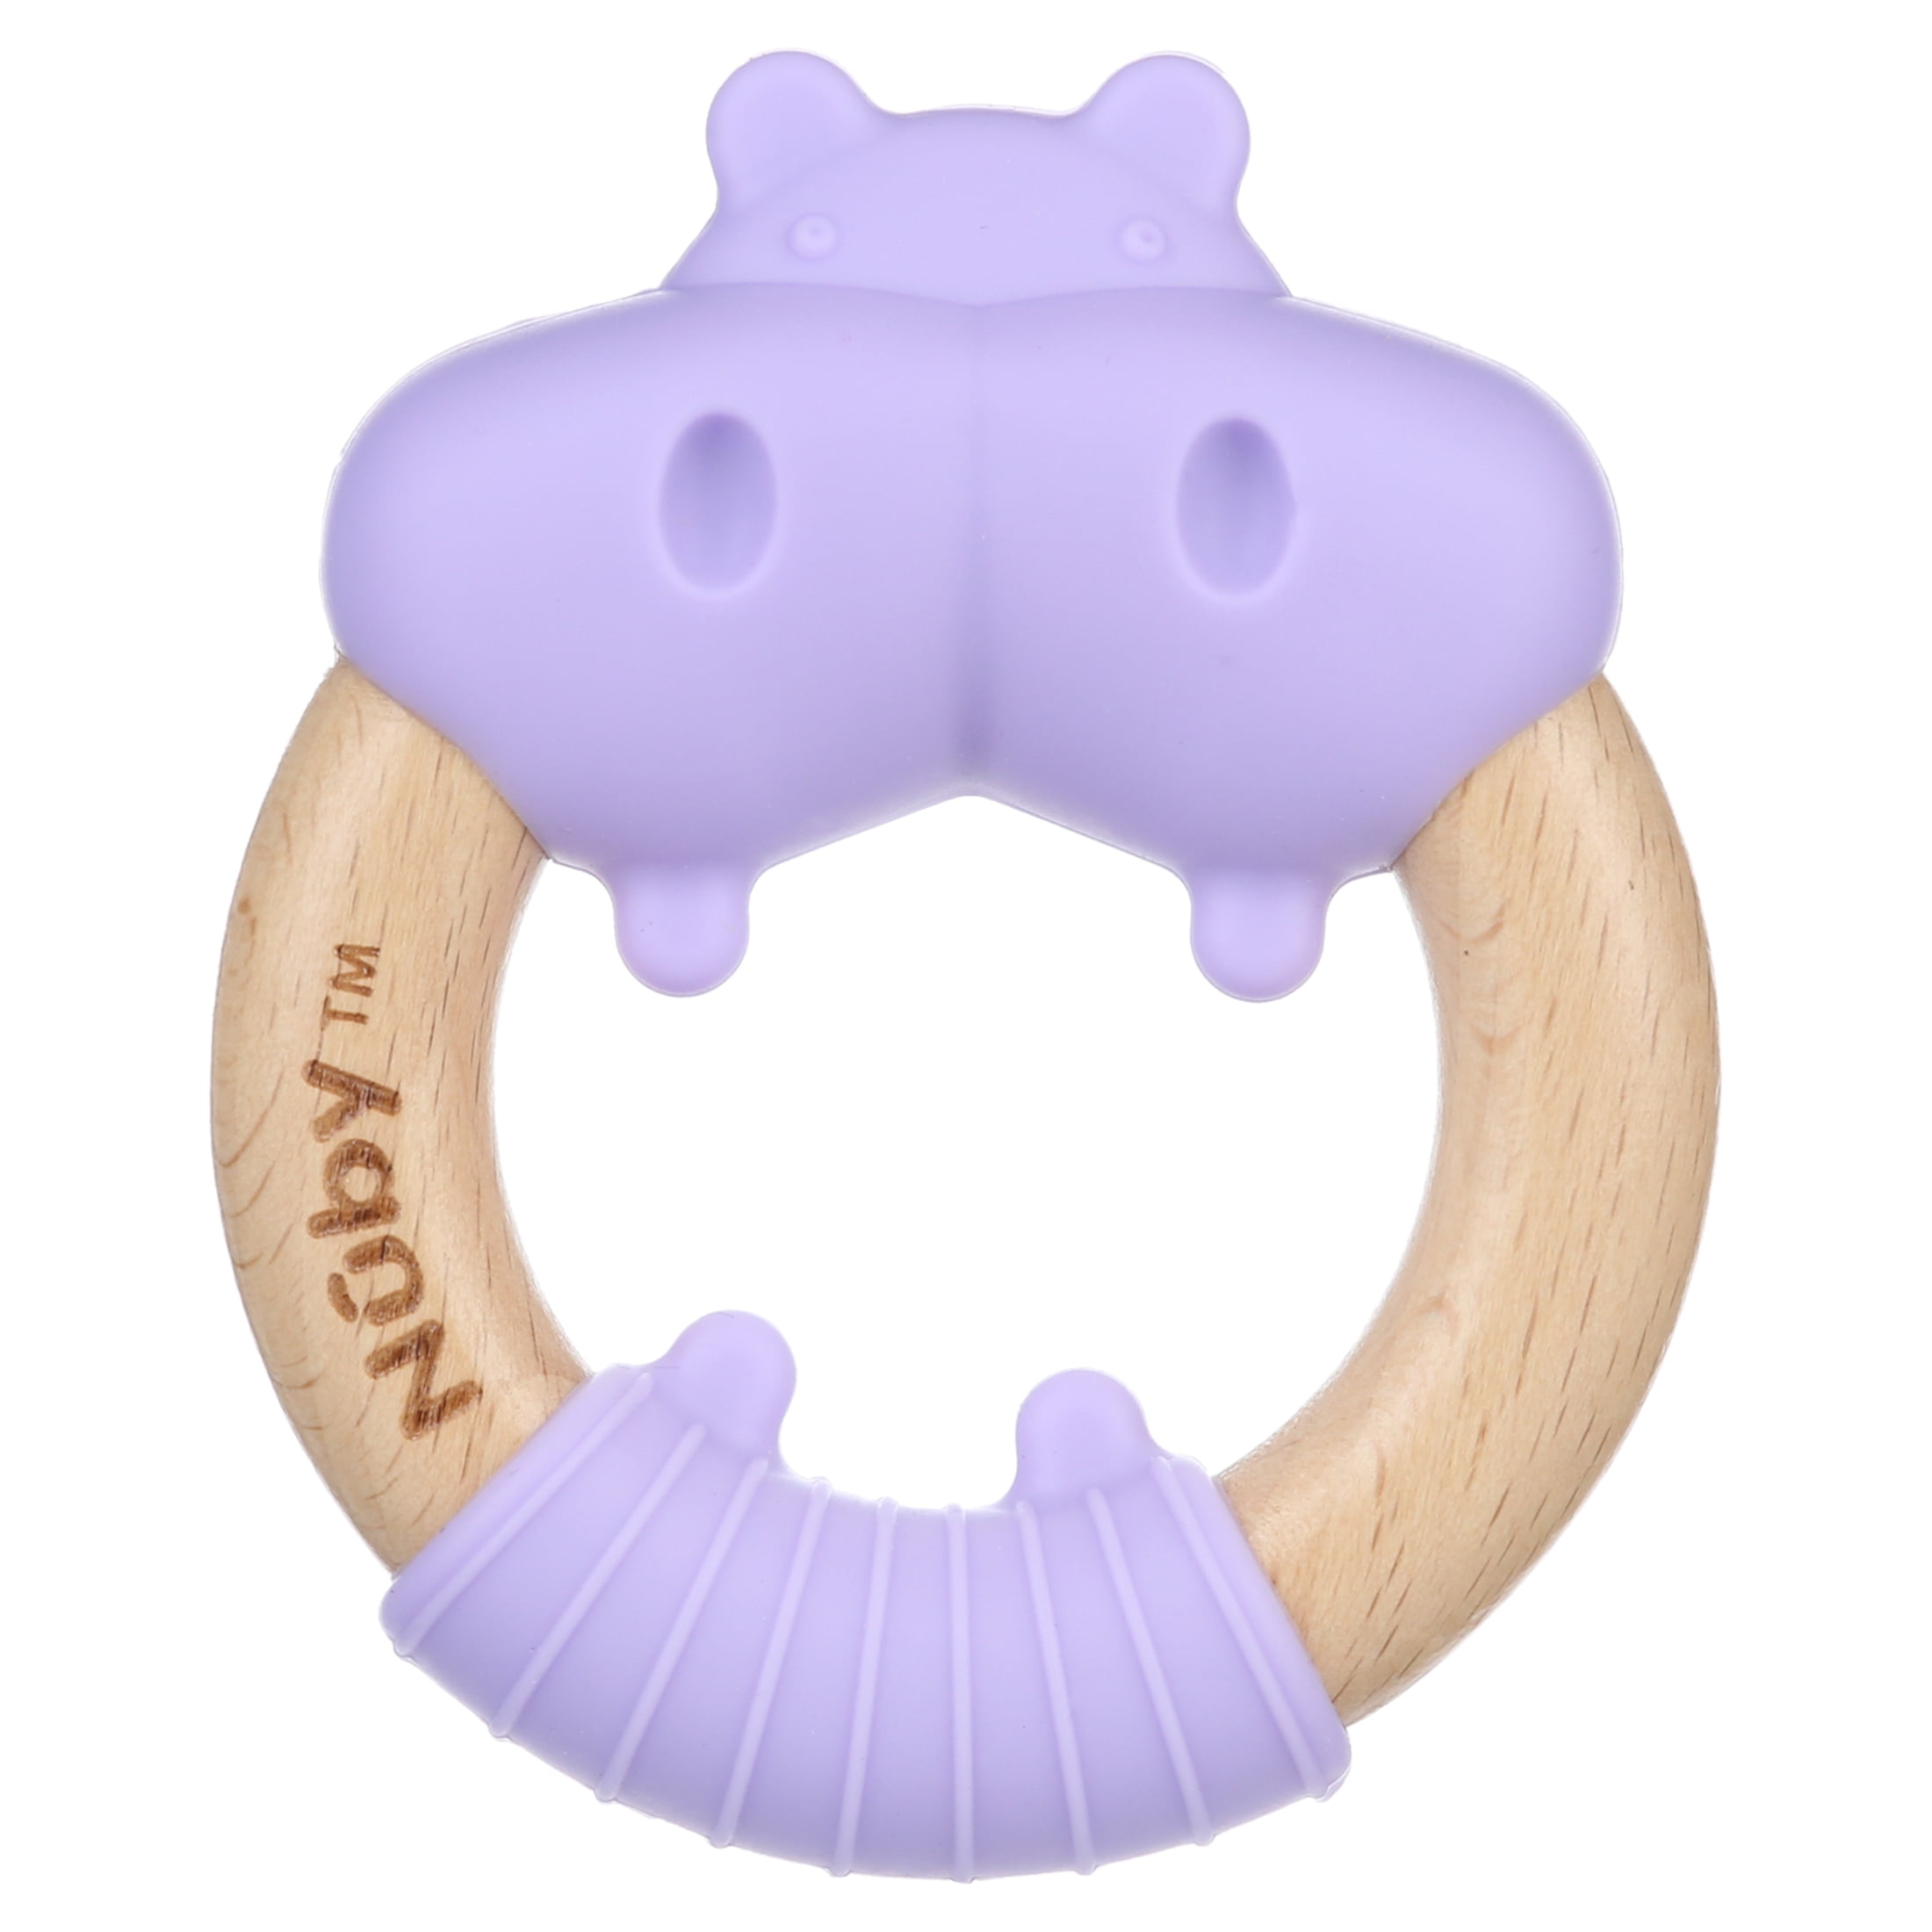 1pcs Natural wood Safety Wooden Teether Flowers shape Baby Molar Stick Toy 